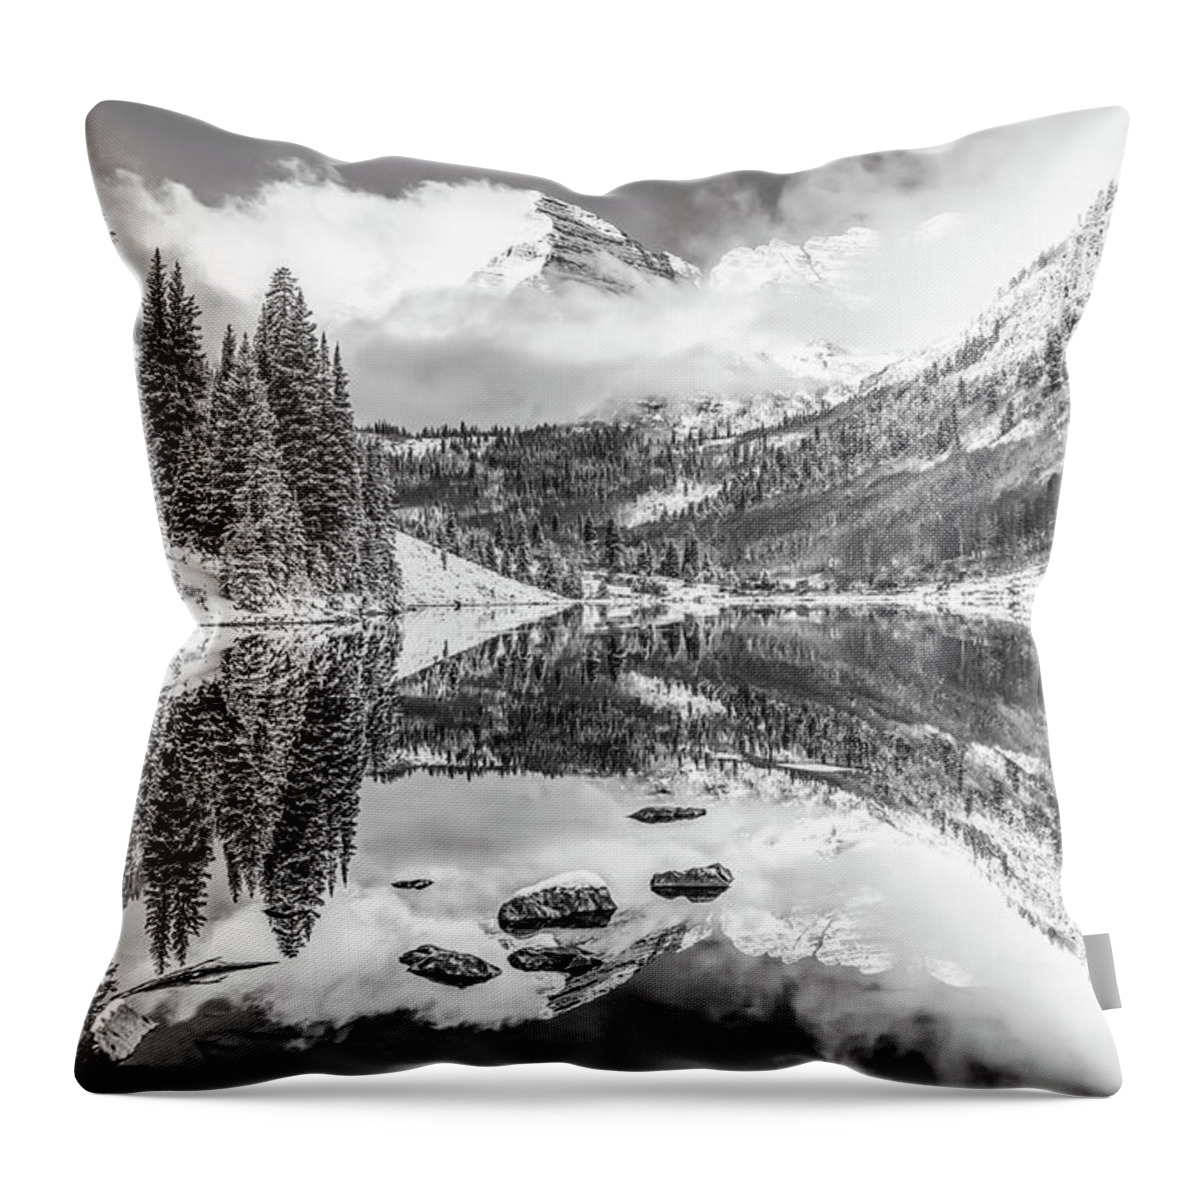 Aspen Throw Pillow featuring the photograph Winter's Whisper At Maroon Bells - Black And White by Gregory Ballos